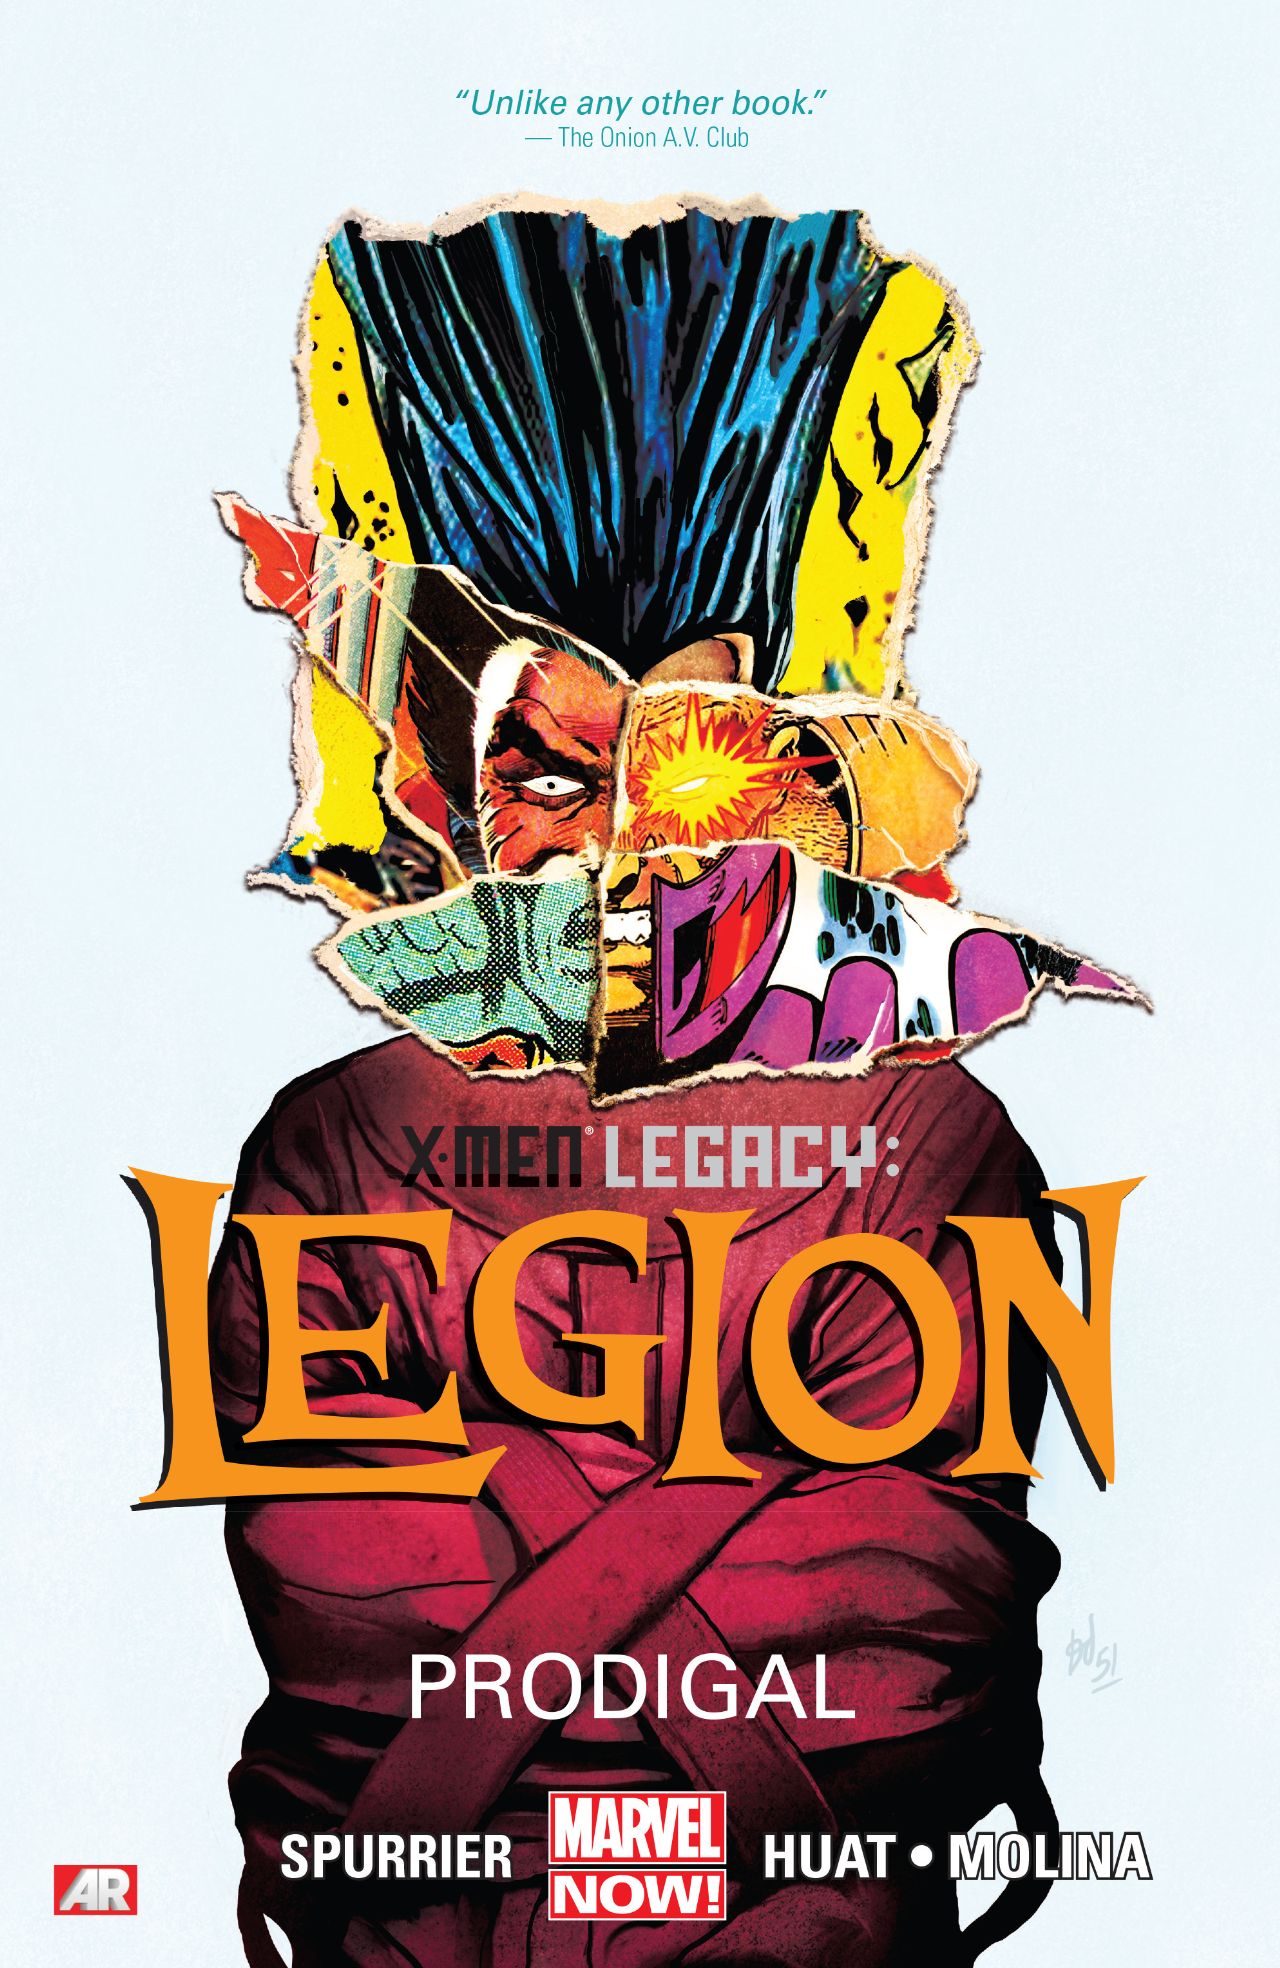 Legion: Son of X Vol. 1: Prodigal review: a flawed hero's journey begins